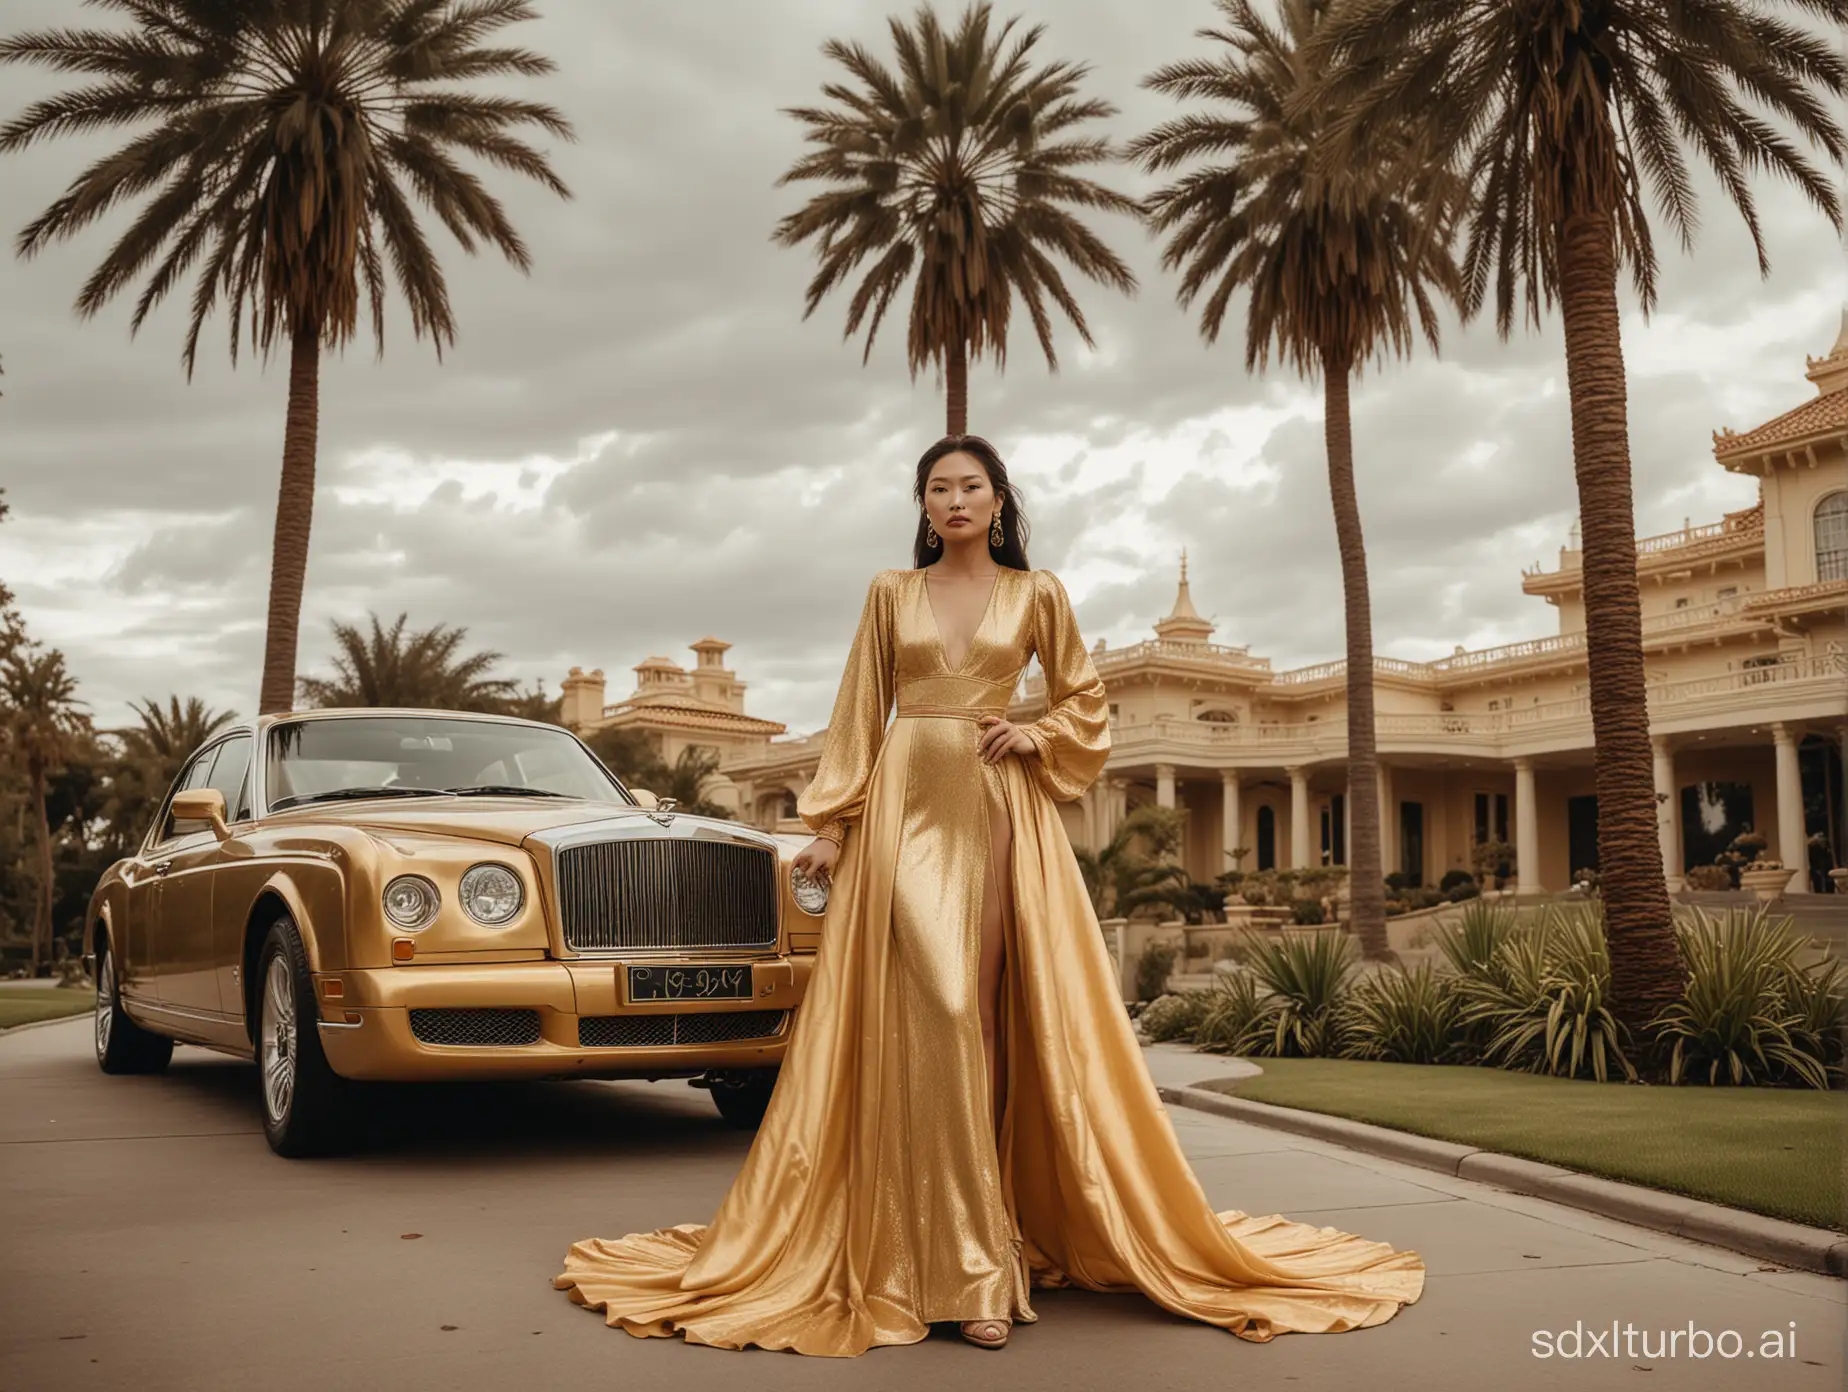 Surreal-High-Fashion-Mongolian-Woman-in-Golden-Maxi-Dress-at-Bel-Air-Mansion